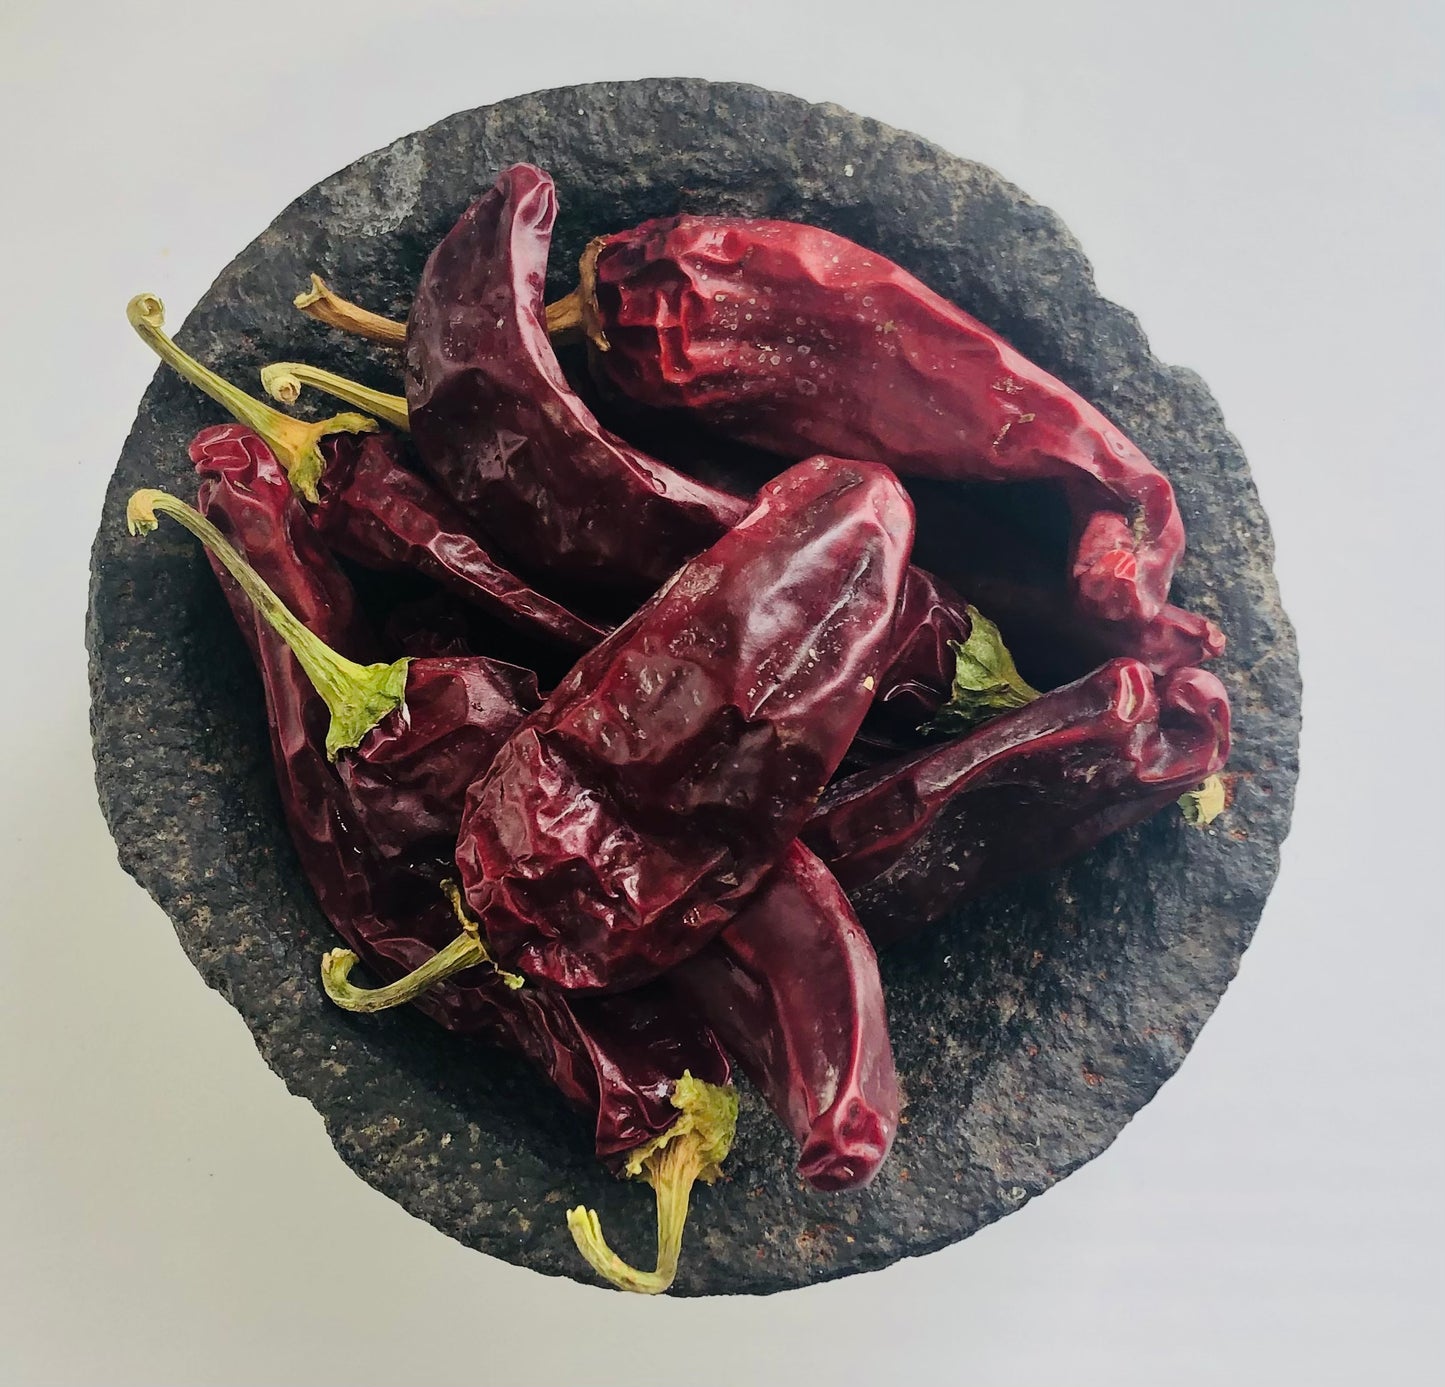 Chimayo Chile Pods Red-Hot 10oz.-Gallon size bag